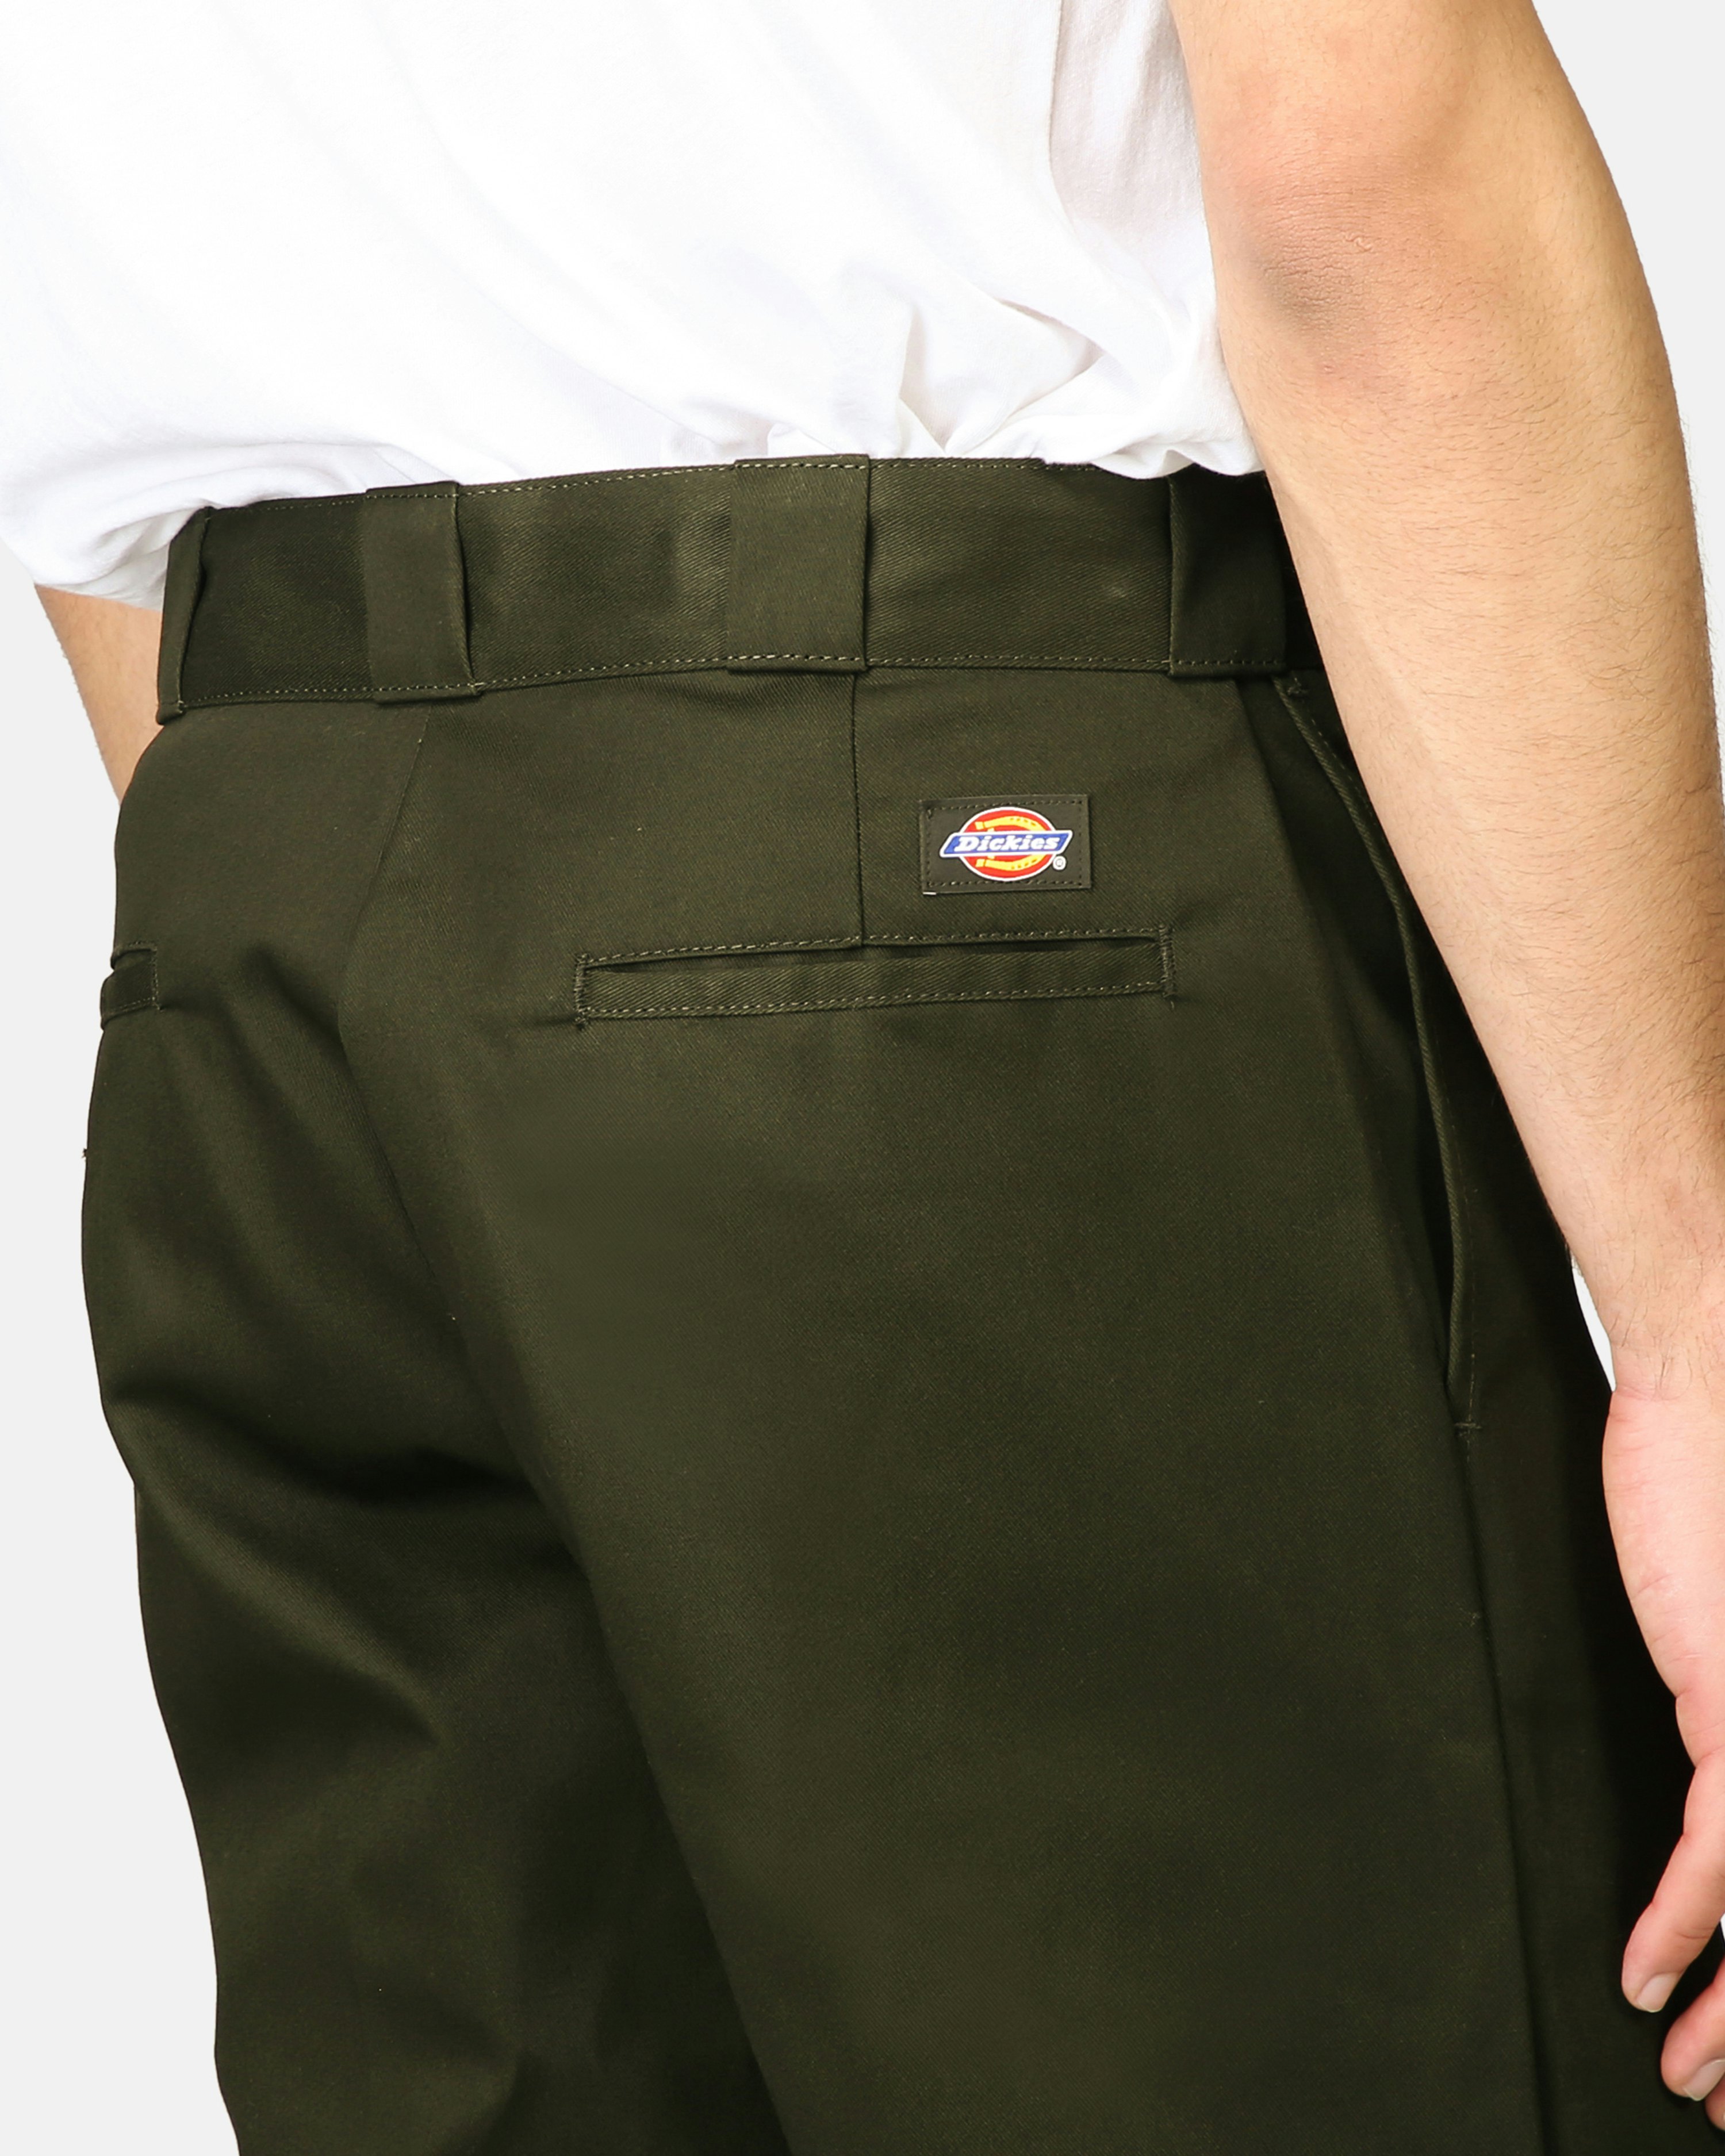 DICKIES 874 WORK PANT oOLIVE Size W 38 L 32 Color Olive oil